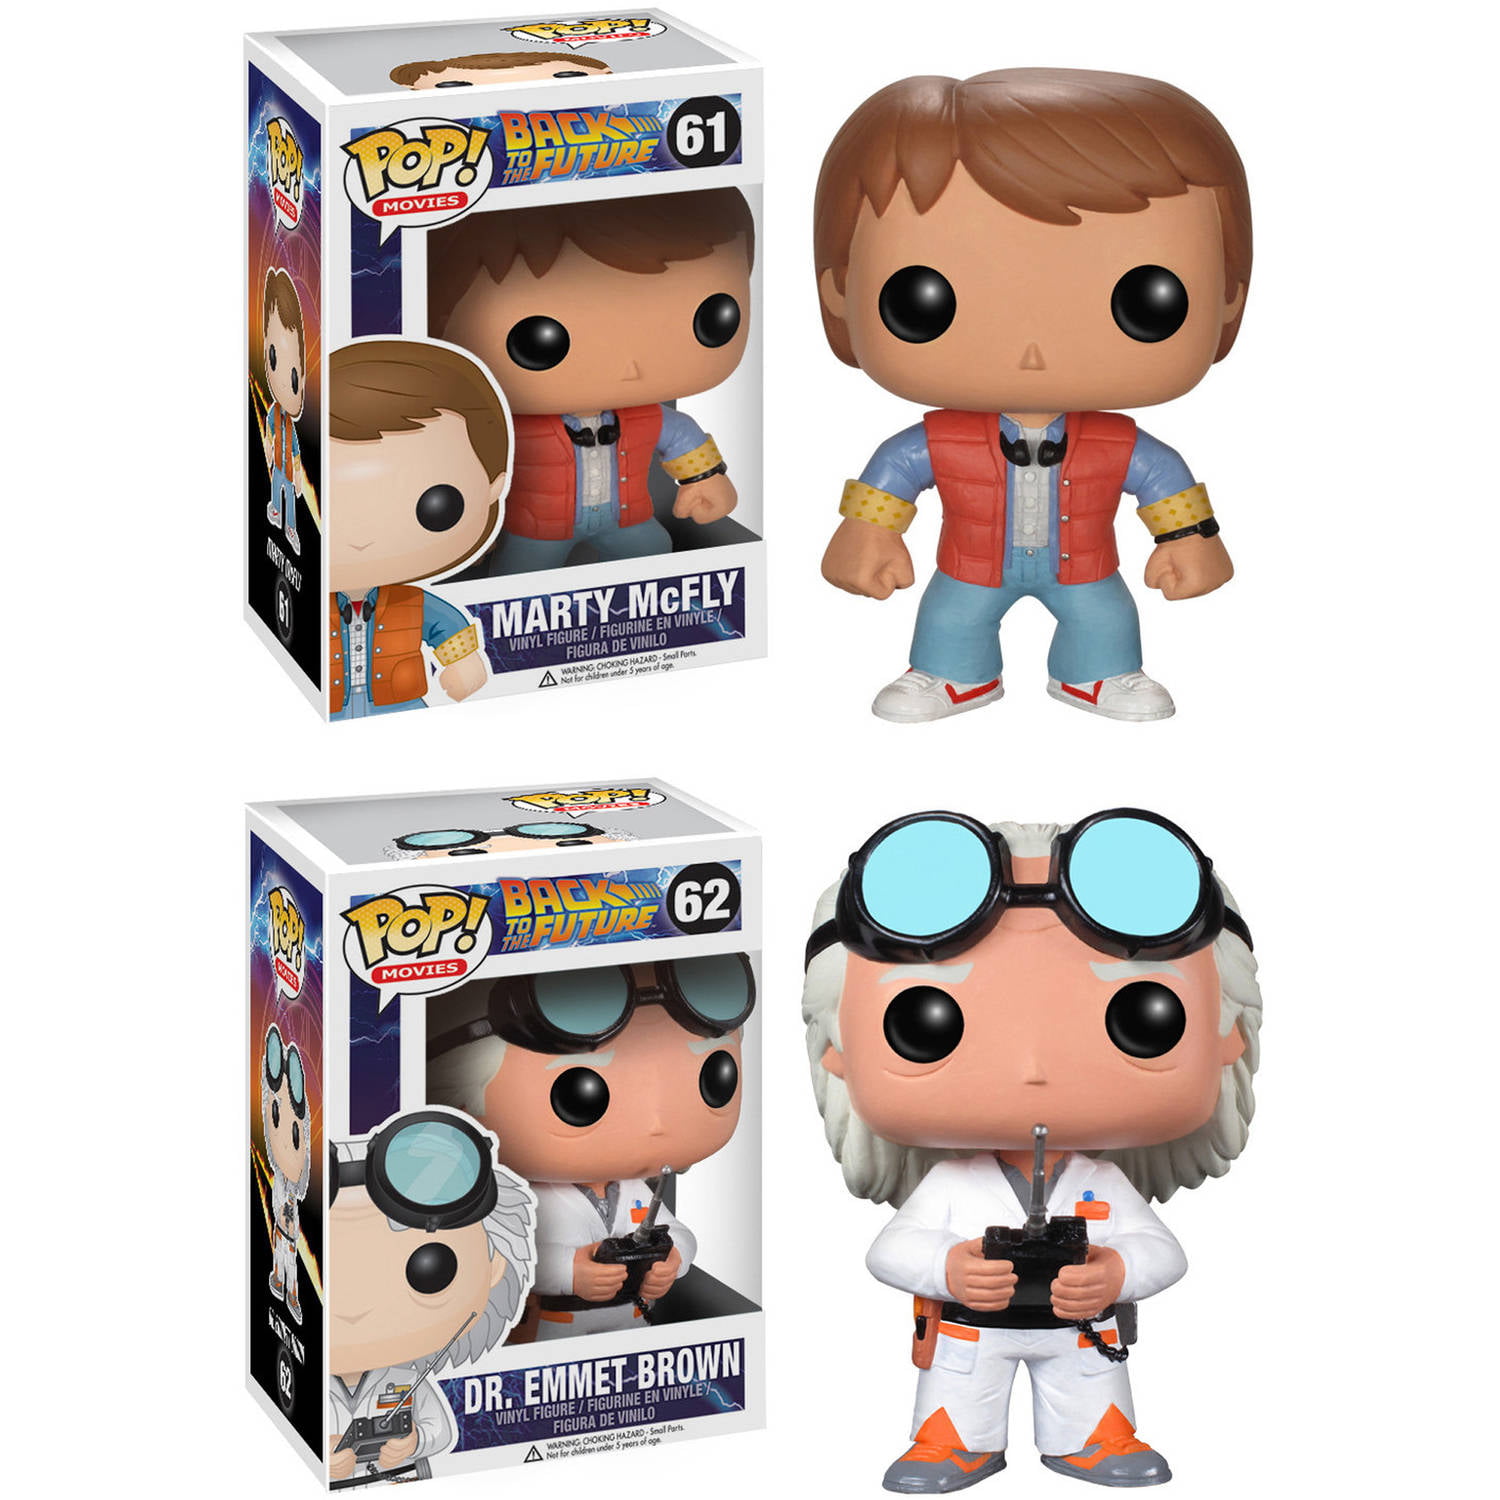 Funko Back to the Future Pop! Movie Vinyl Collectors Set Doc Emmet Brown & Marty McFly